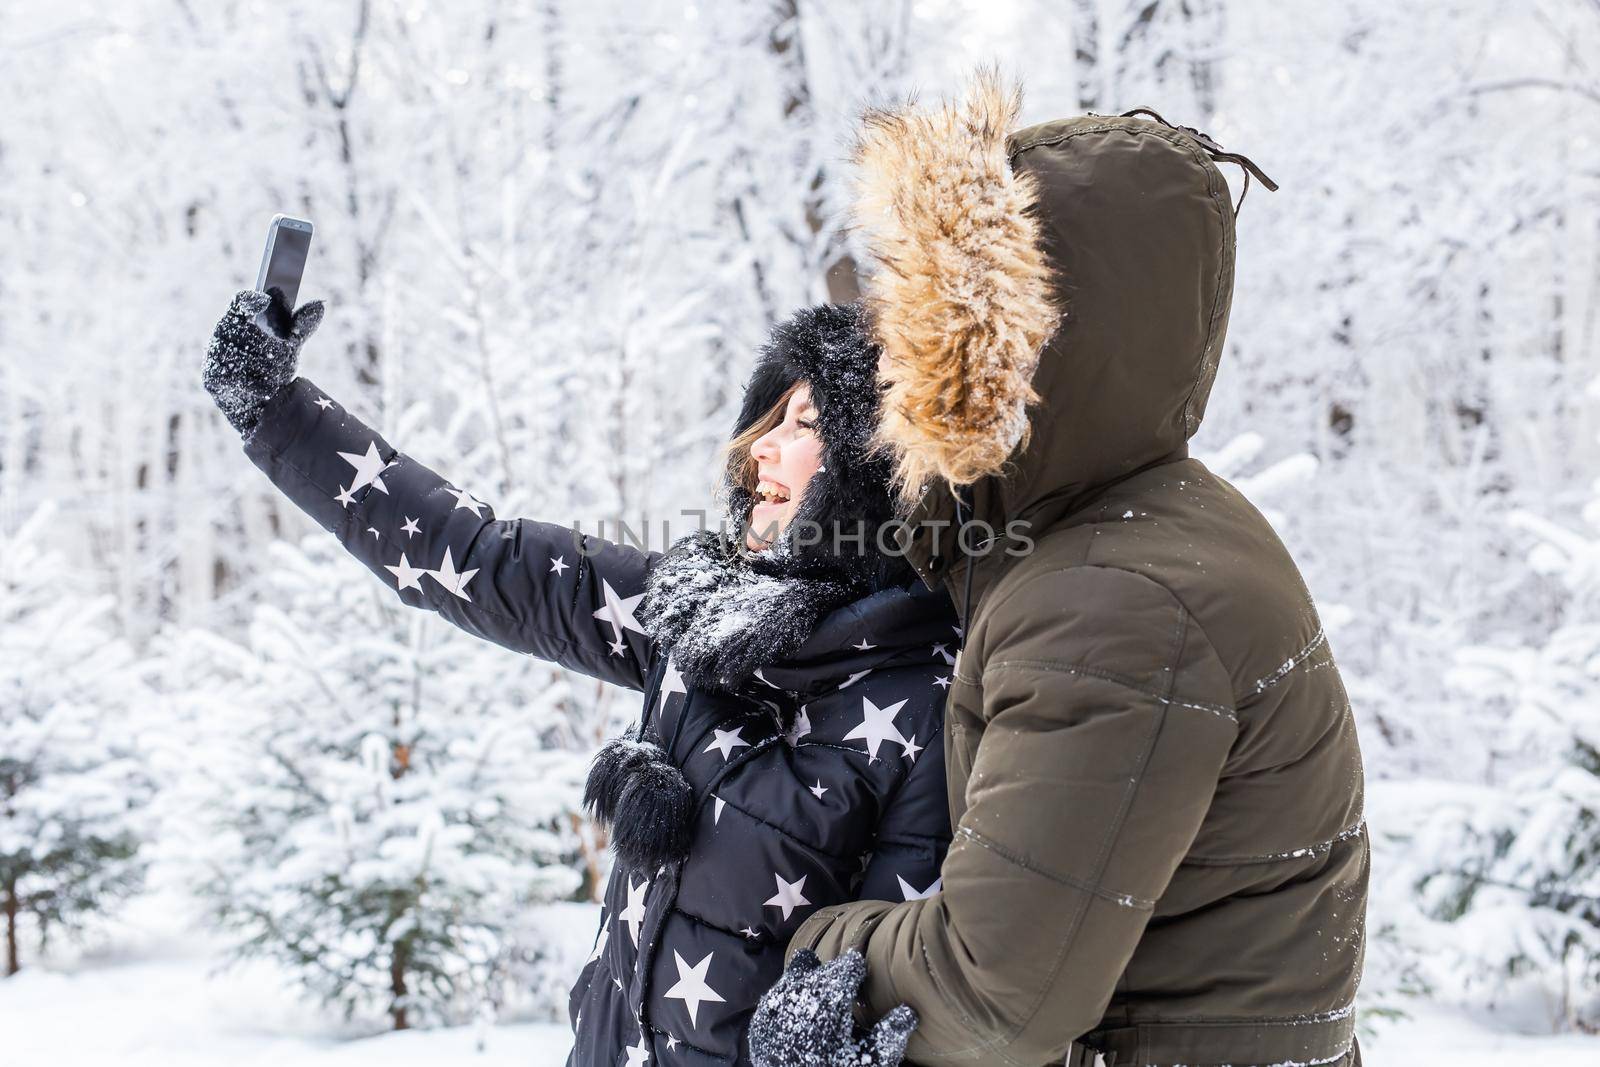 Technologies and relationship concept - Happy smiling couple taking a selfie in a winter forest outside by Satura86